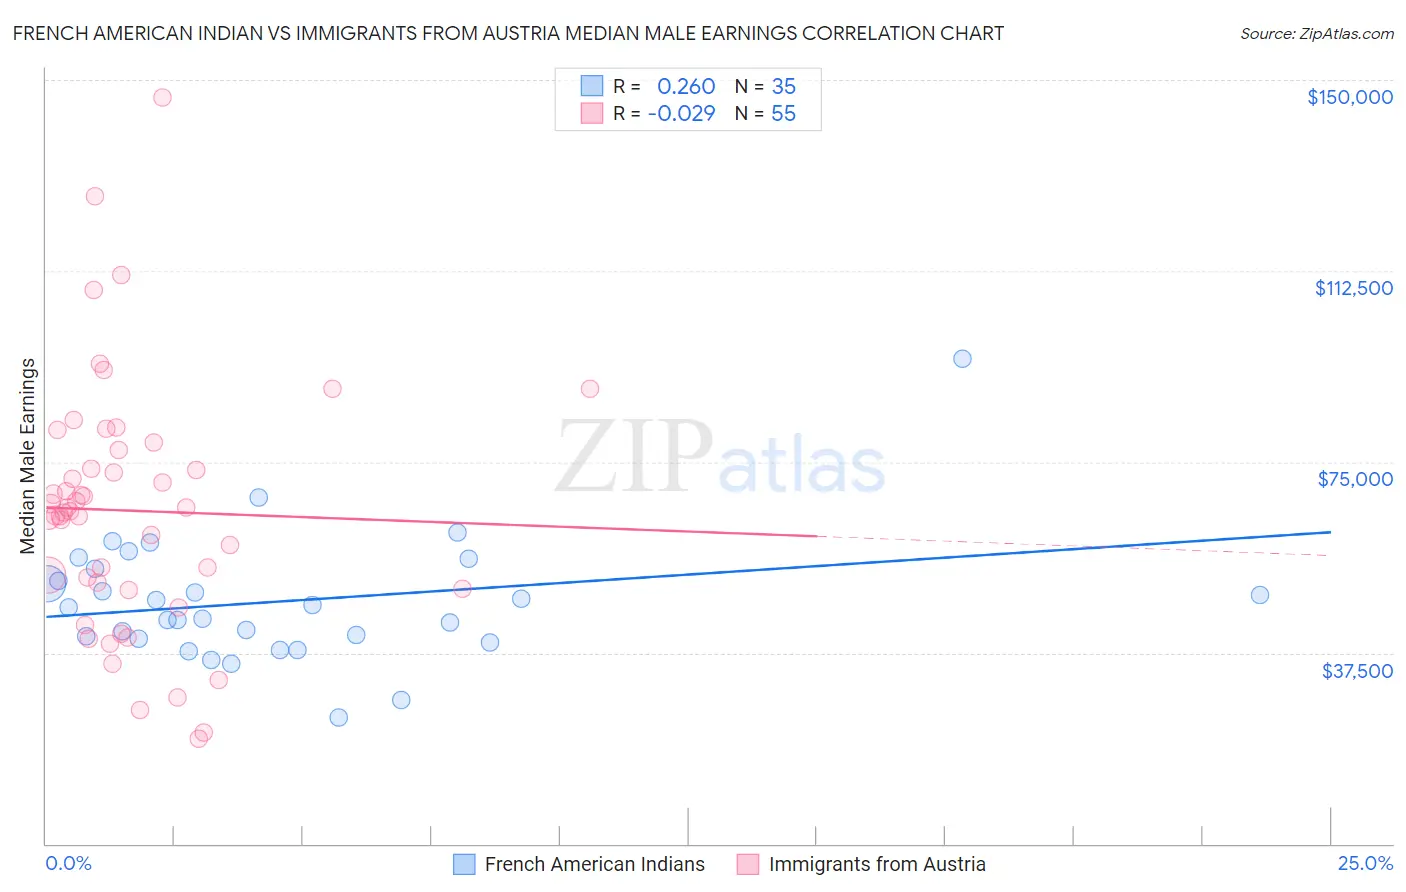 French American Indian vs Immigrants from Austria Median Male Earnings